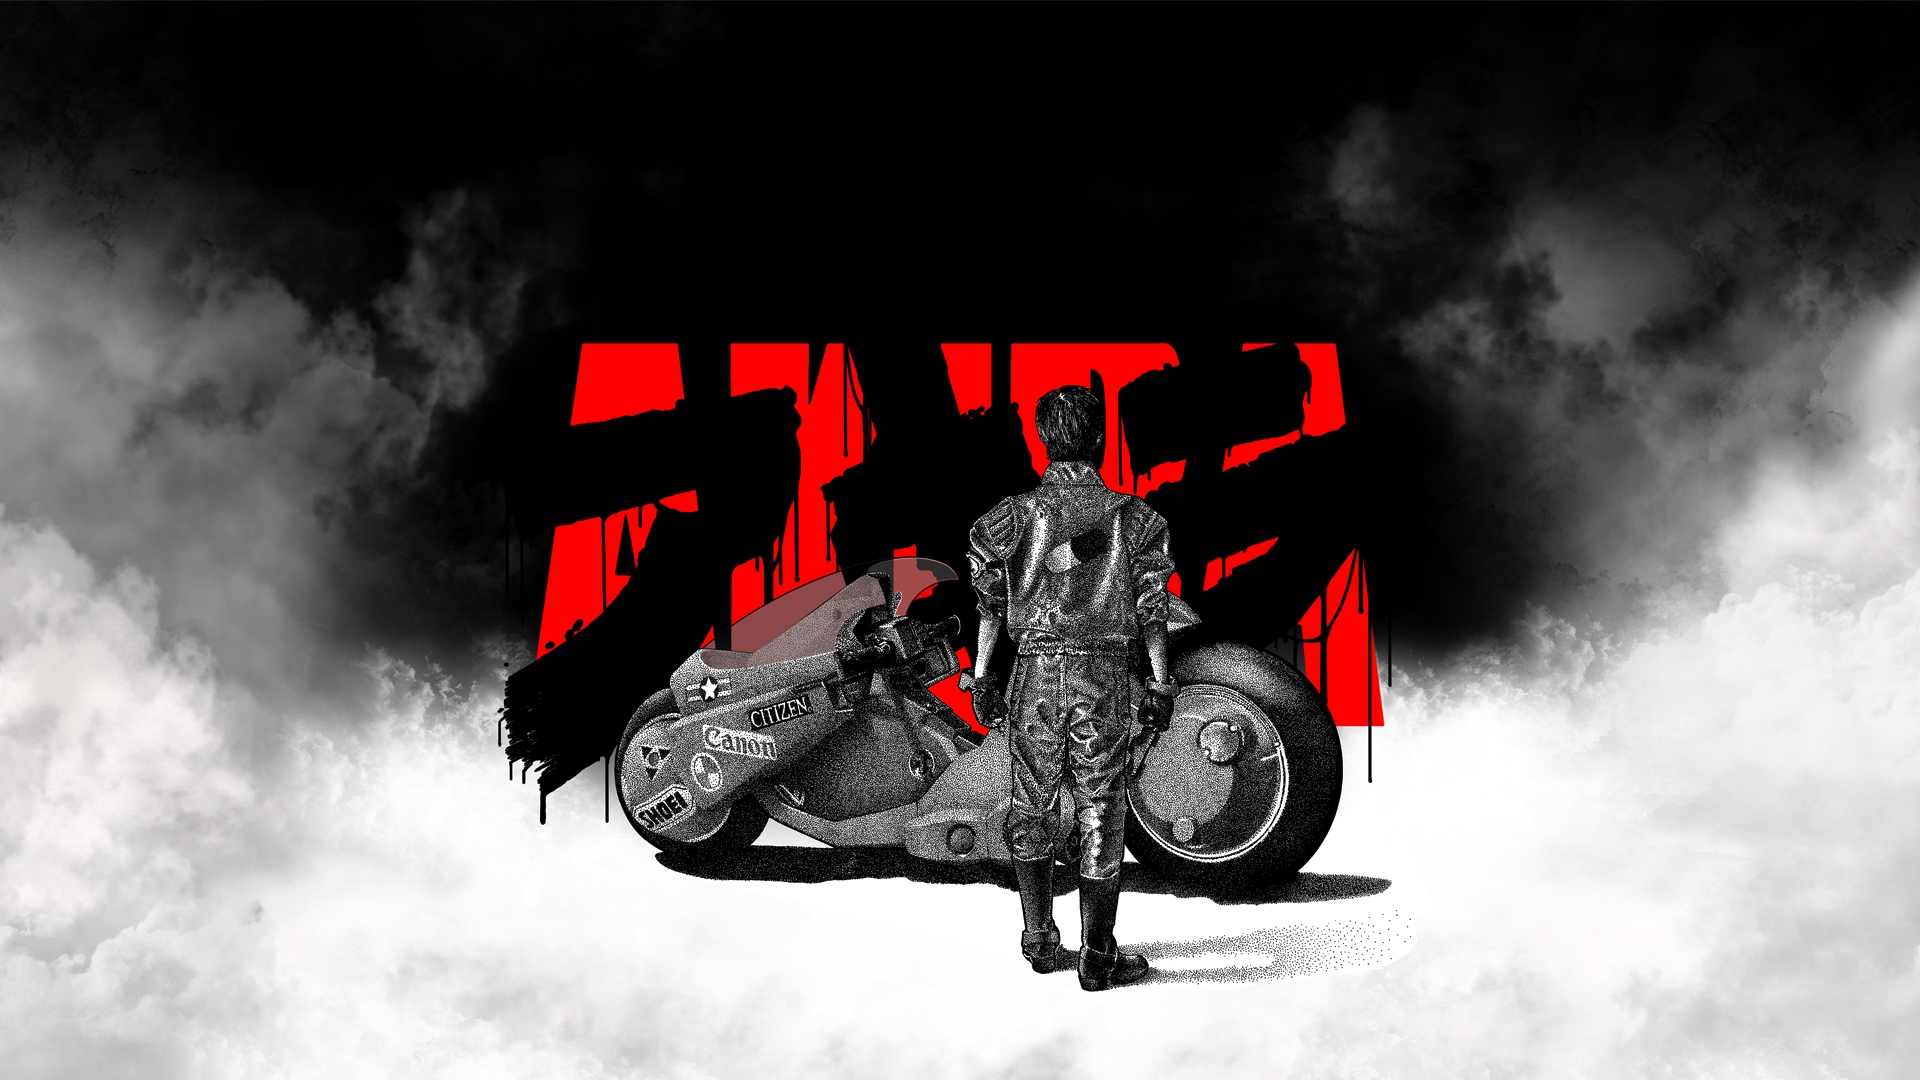 Free Download Hd Akira Wallpaper [1920x1080] For Your